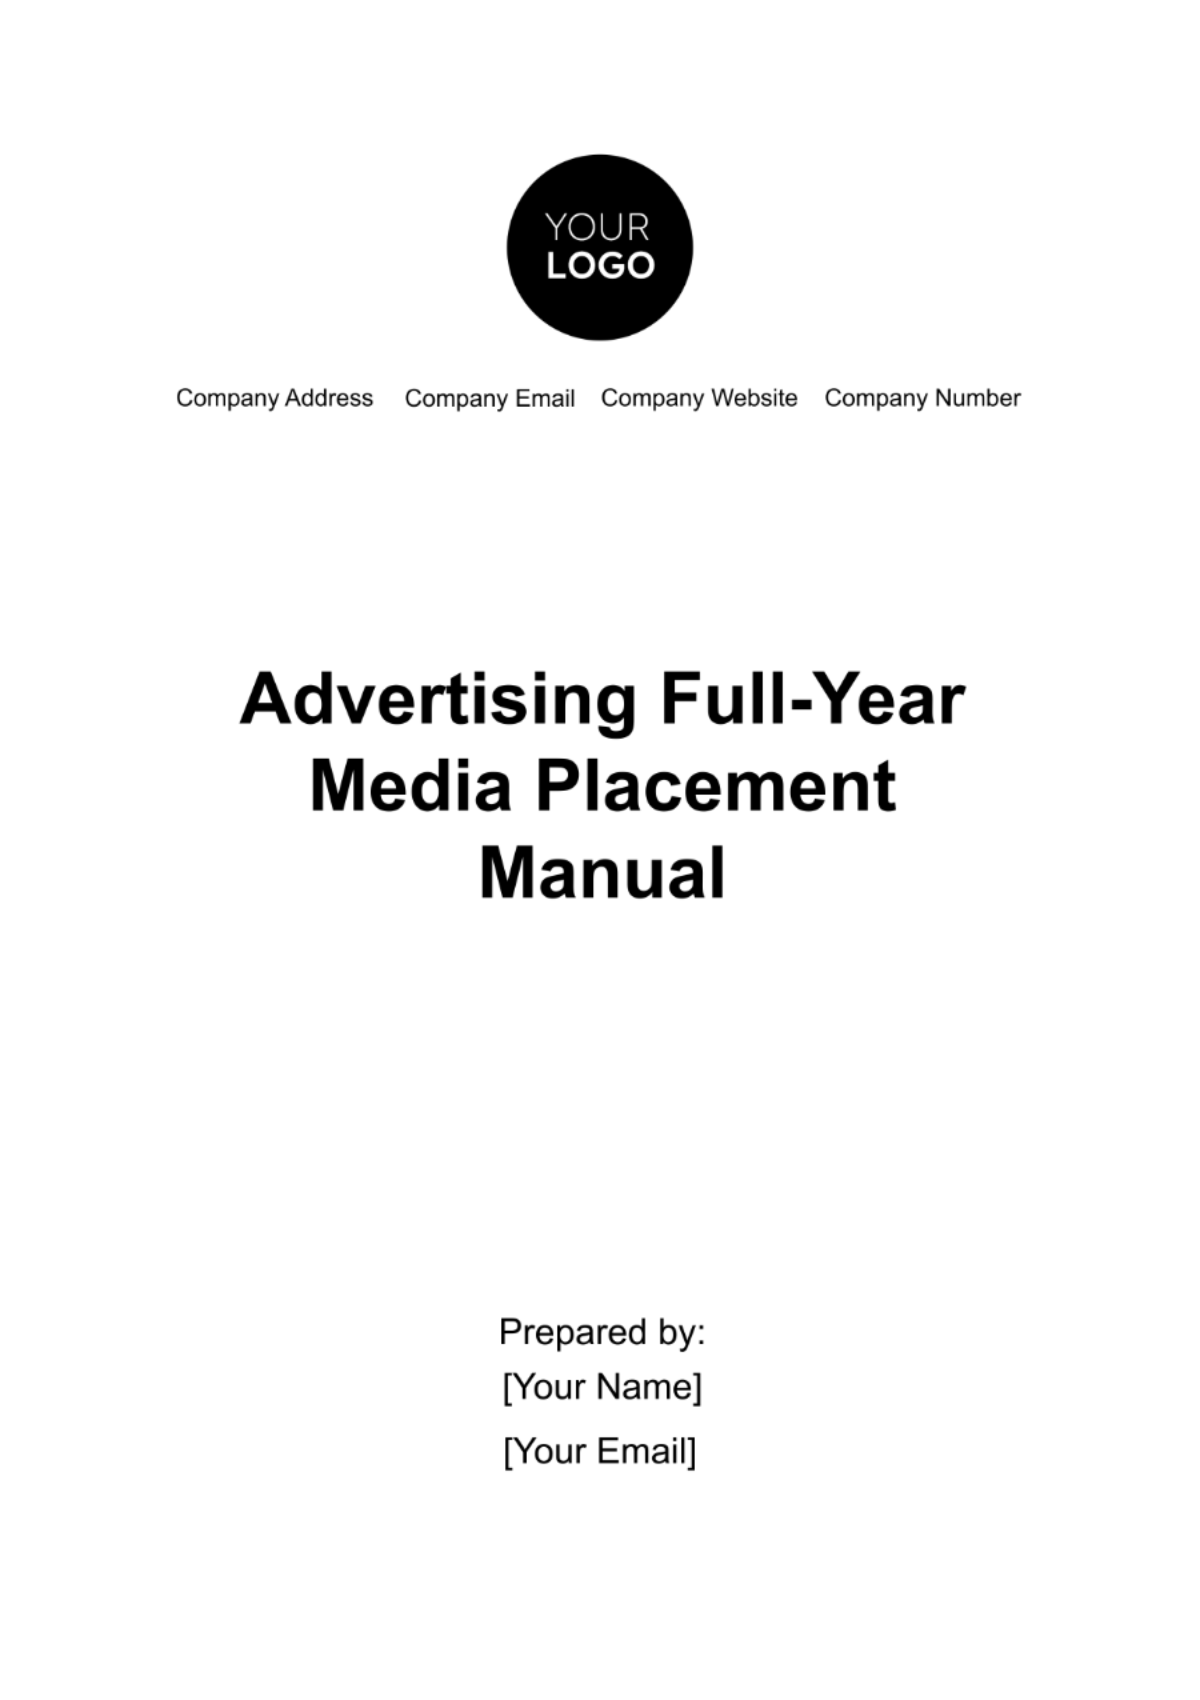 Free Advertising Full-Year Media Placement Manual Template